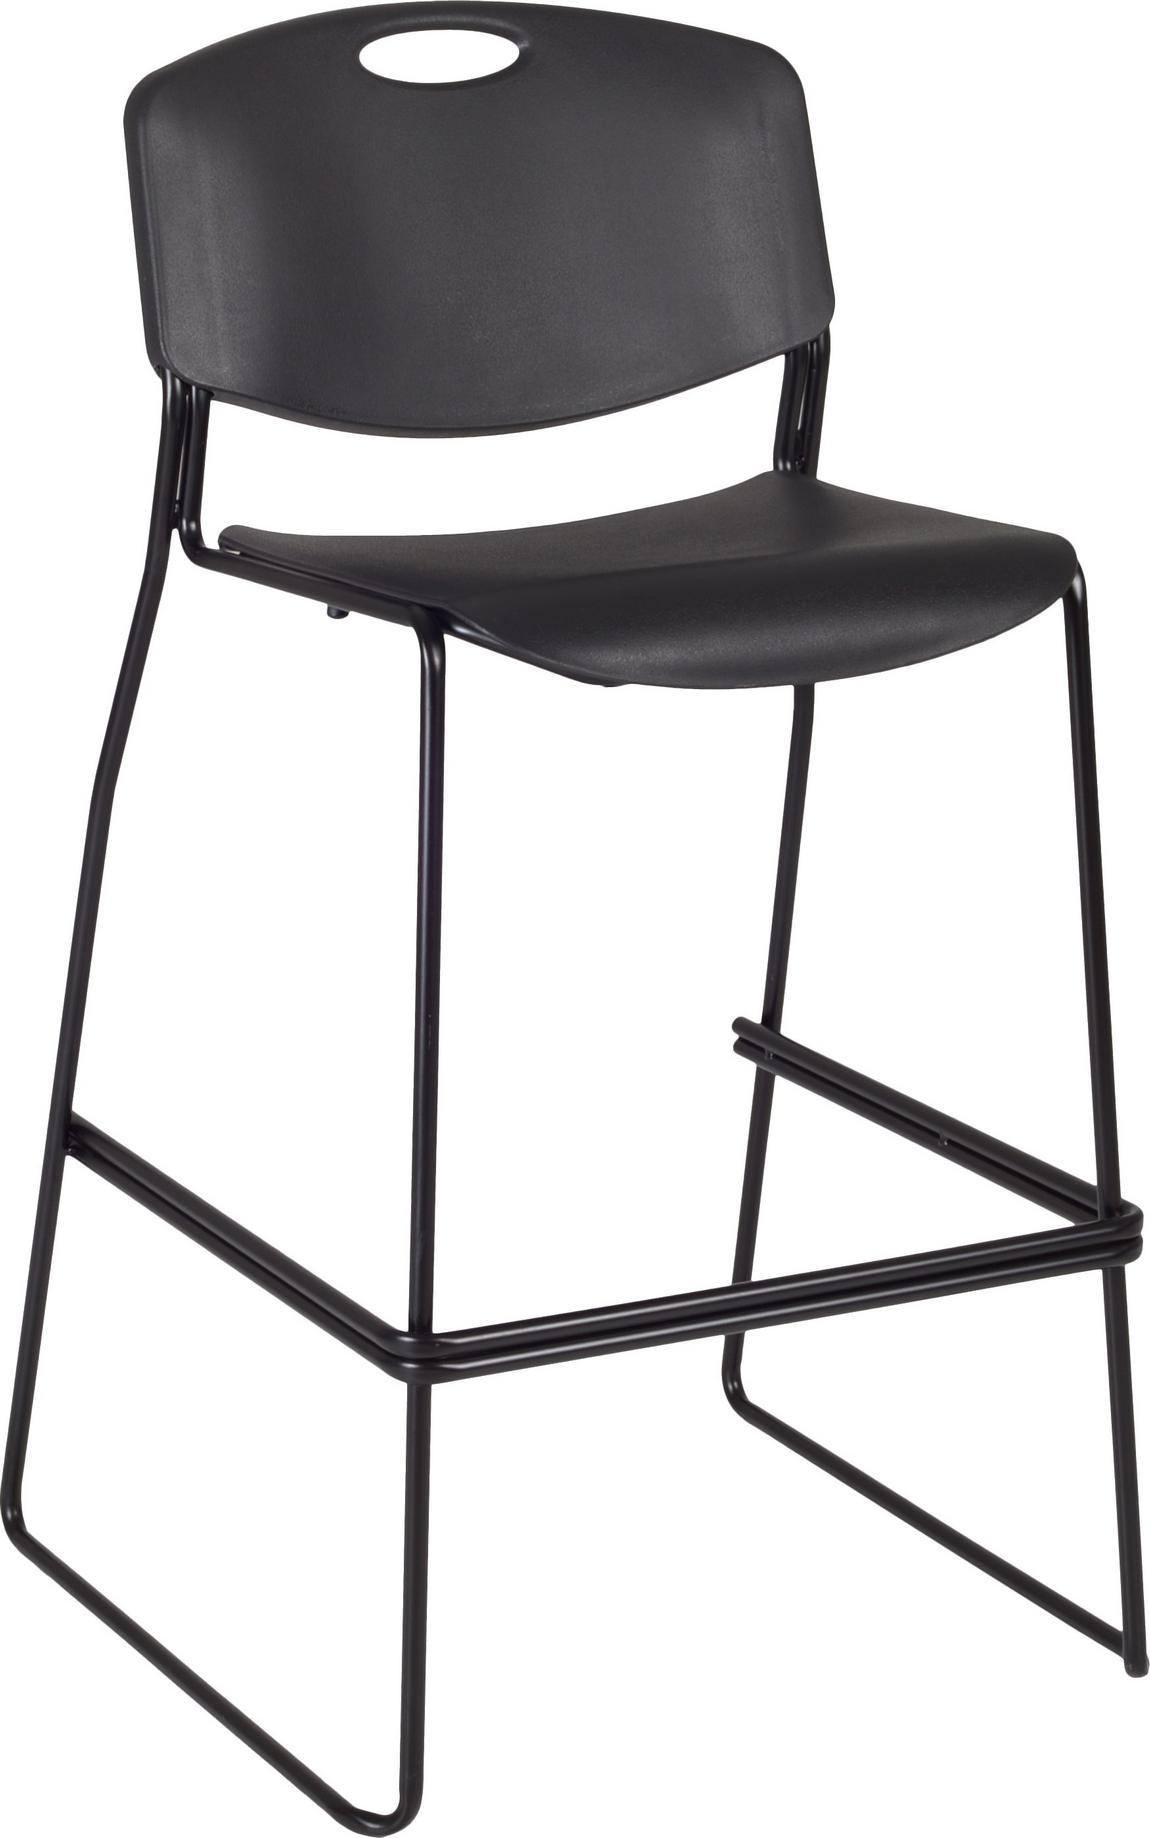 1020 Heavy Duty Black Stackable Counter Height Chair 1 